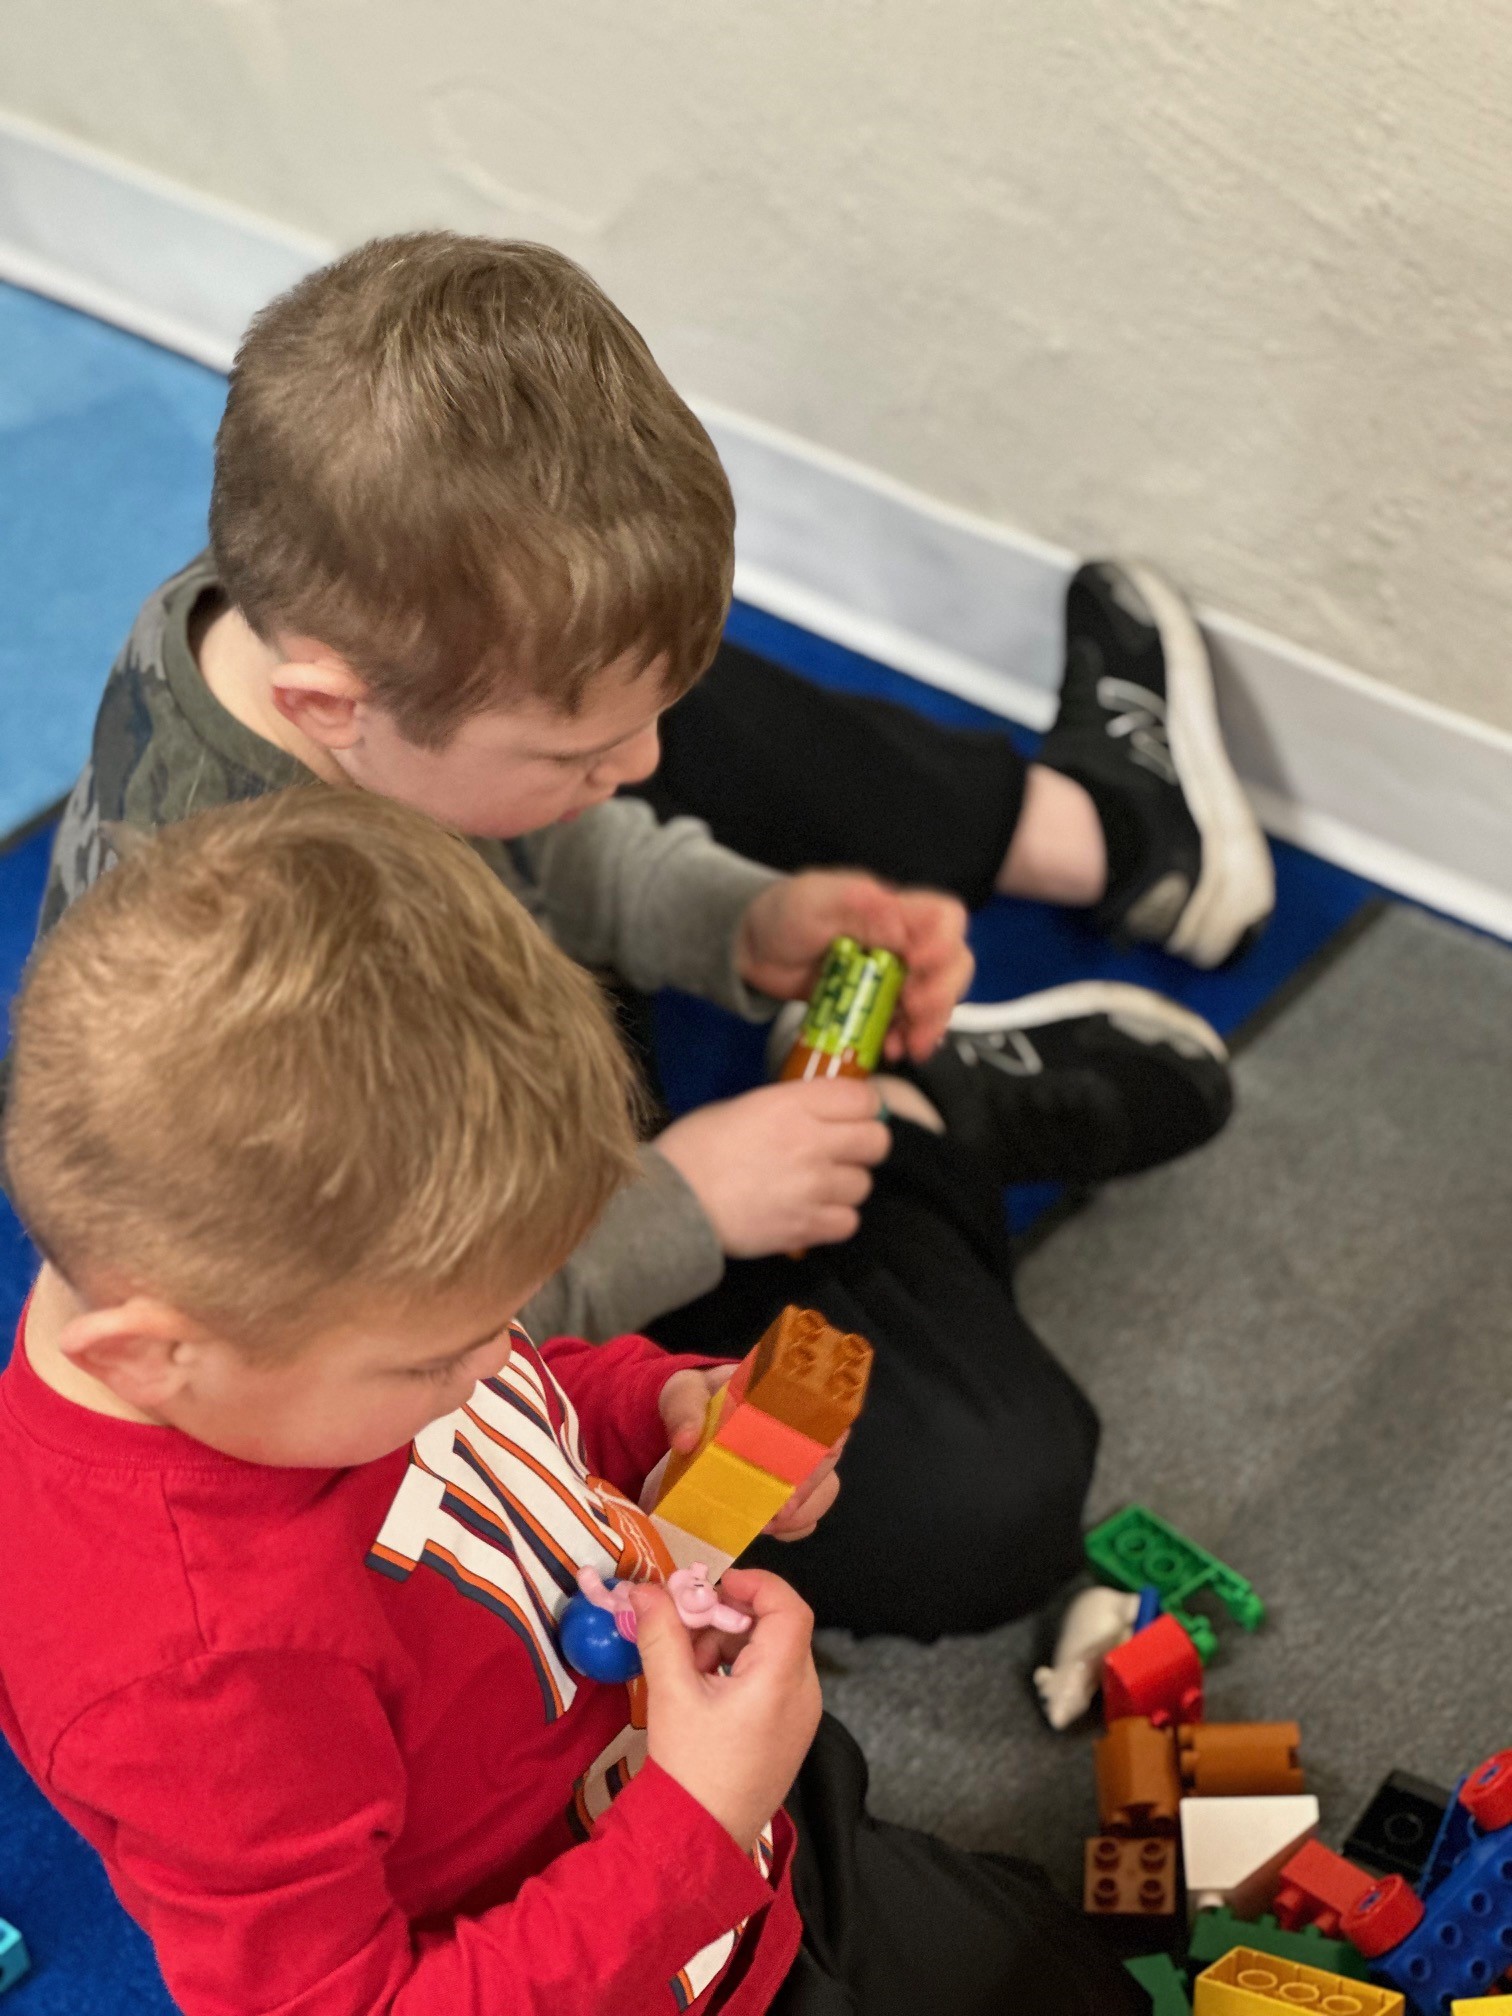 Children building with blocks during story time 